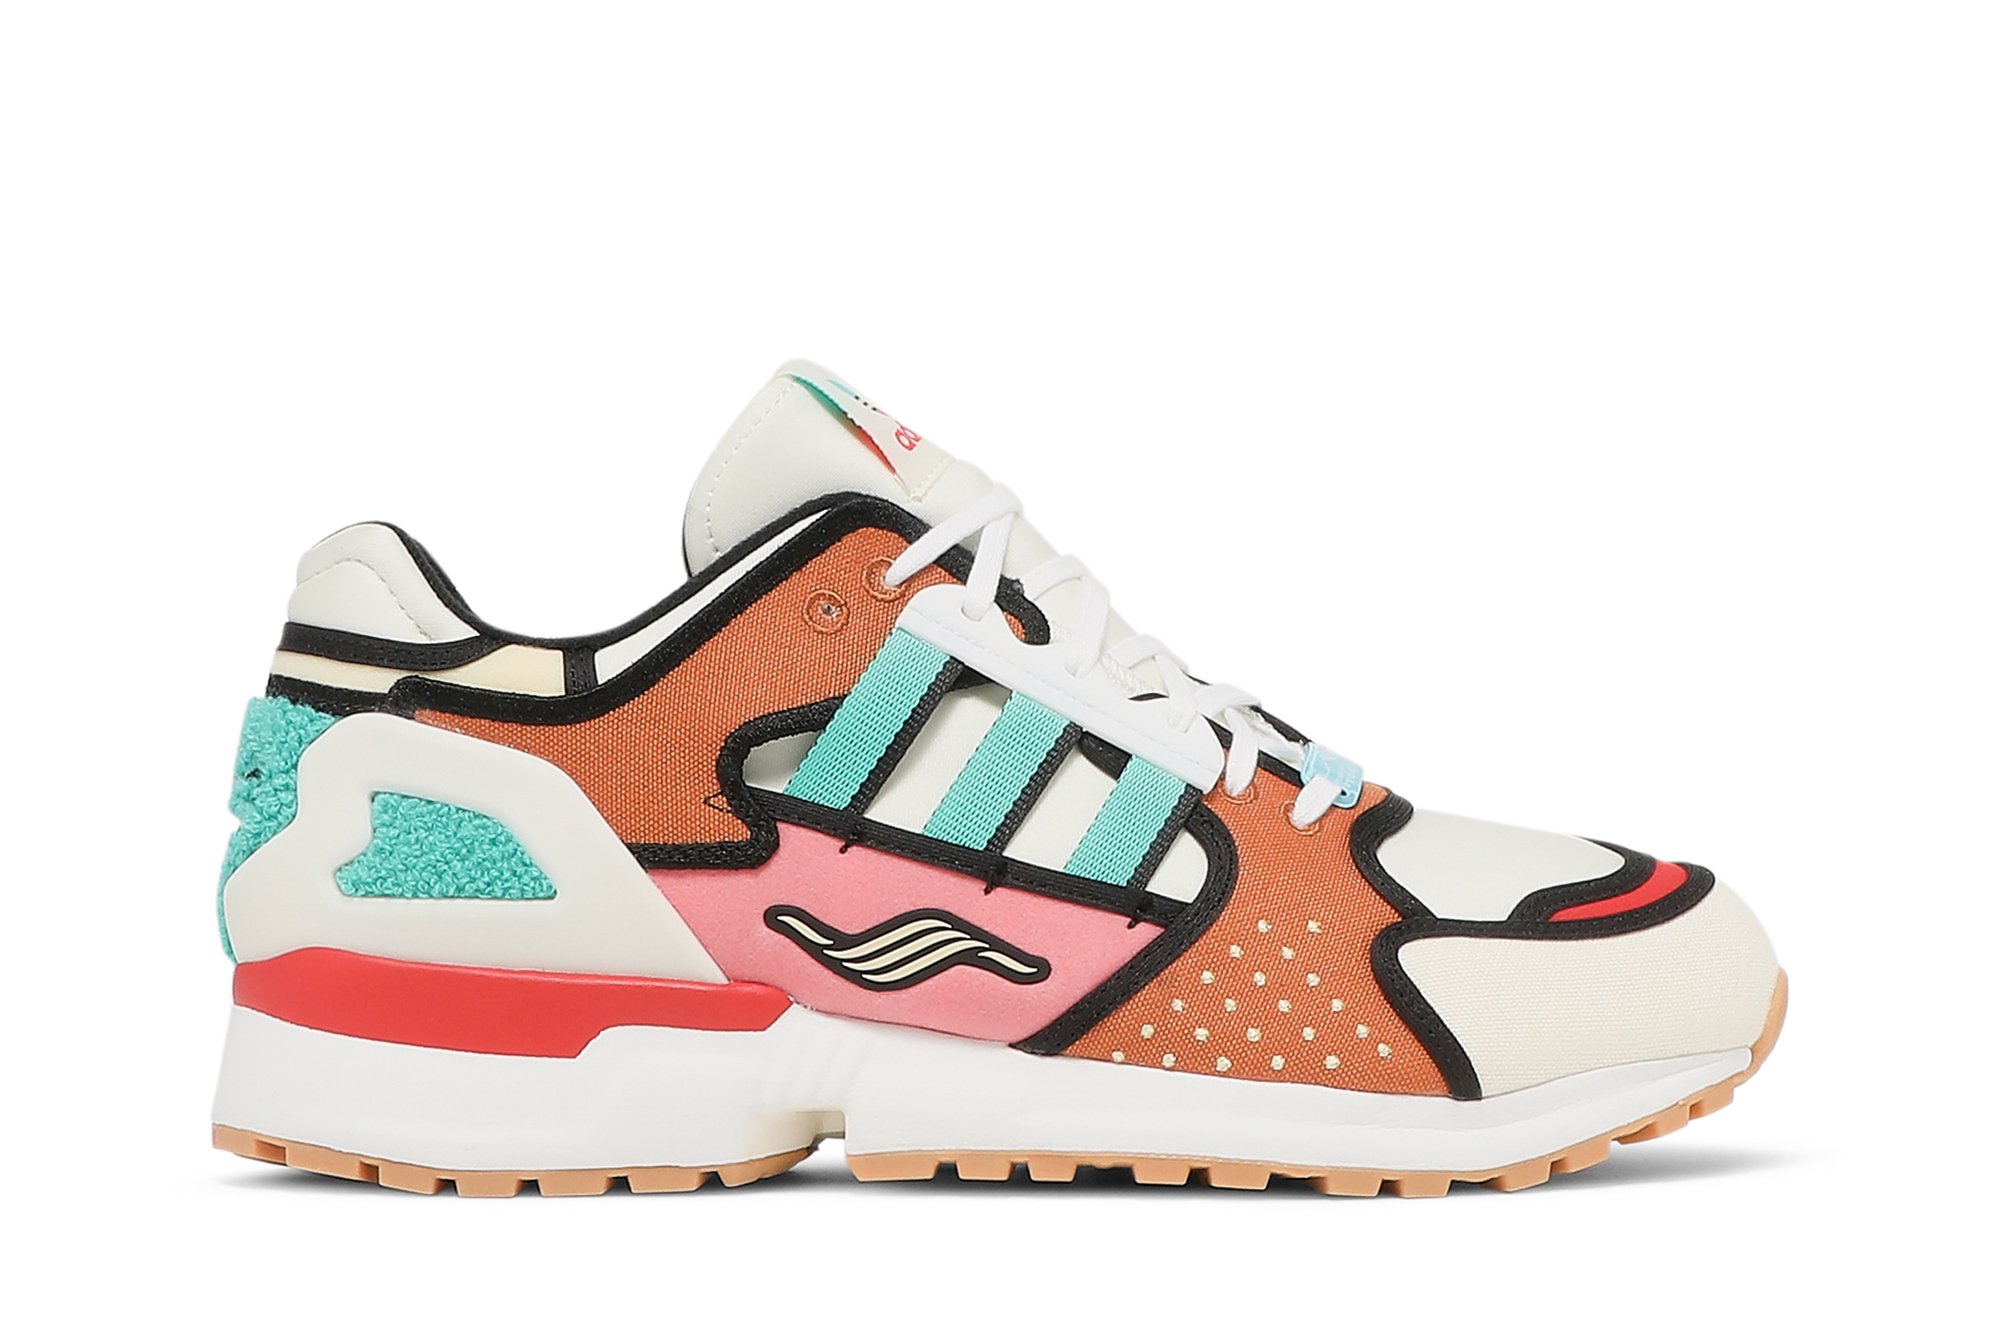 The Simpsons x ZX 10000 'A-ZX Series - Krusty Burger'